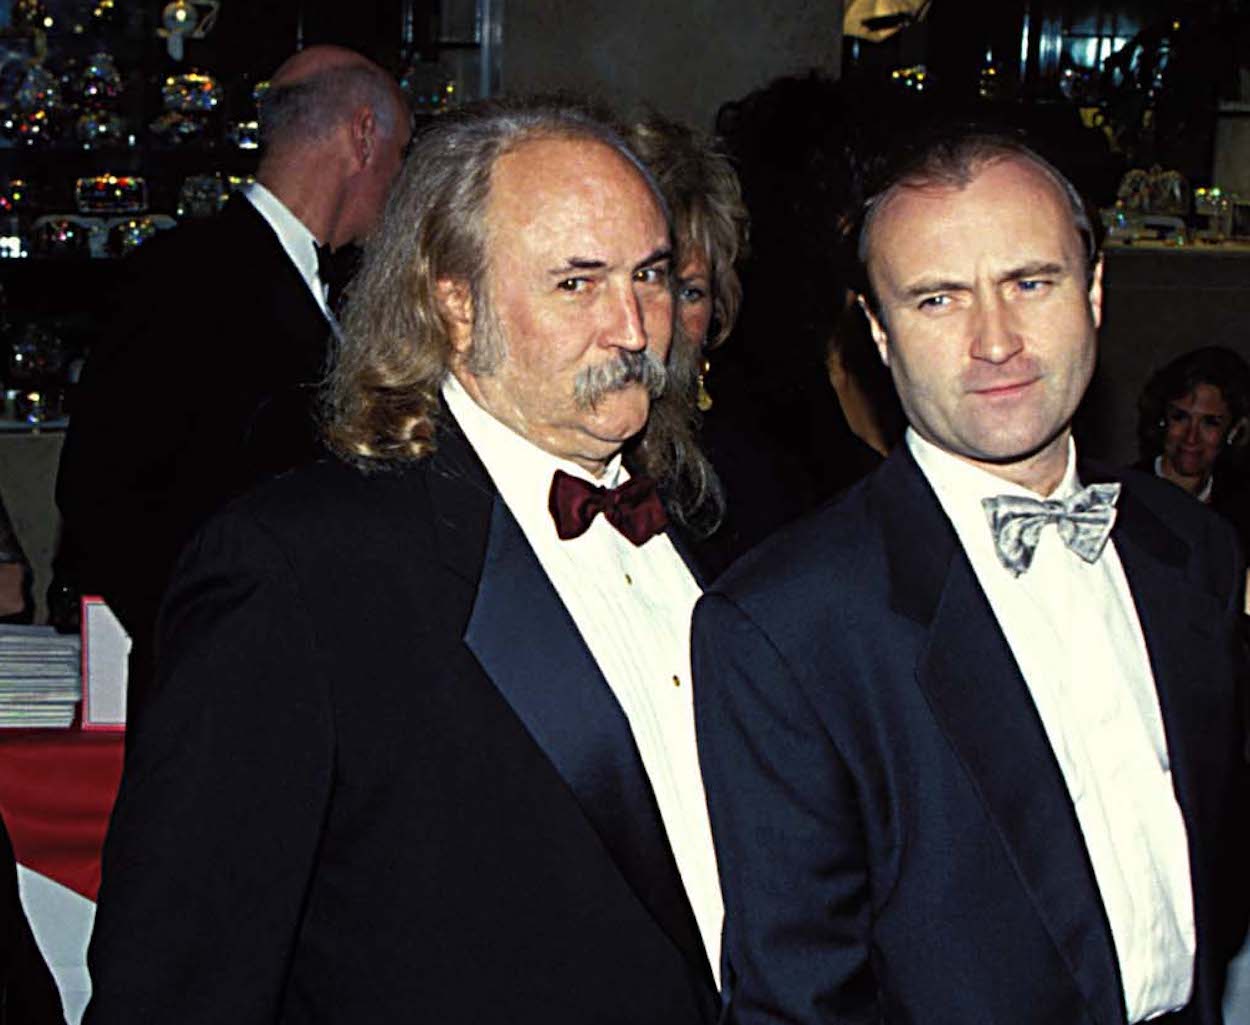 David Crosby (left) and Phil Collins attend the AFI Tribute to Steven Spielberg in December 1995.